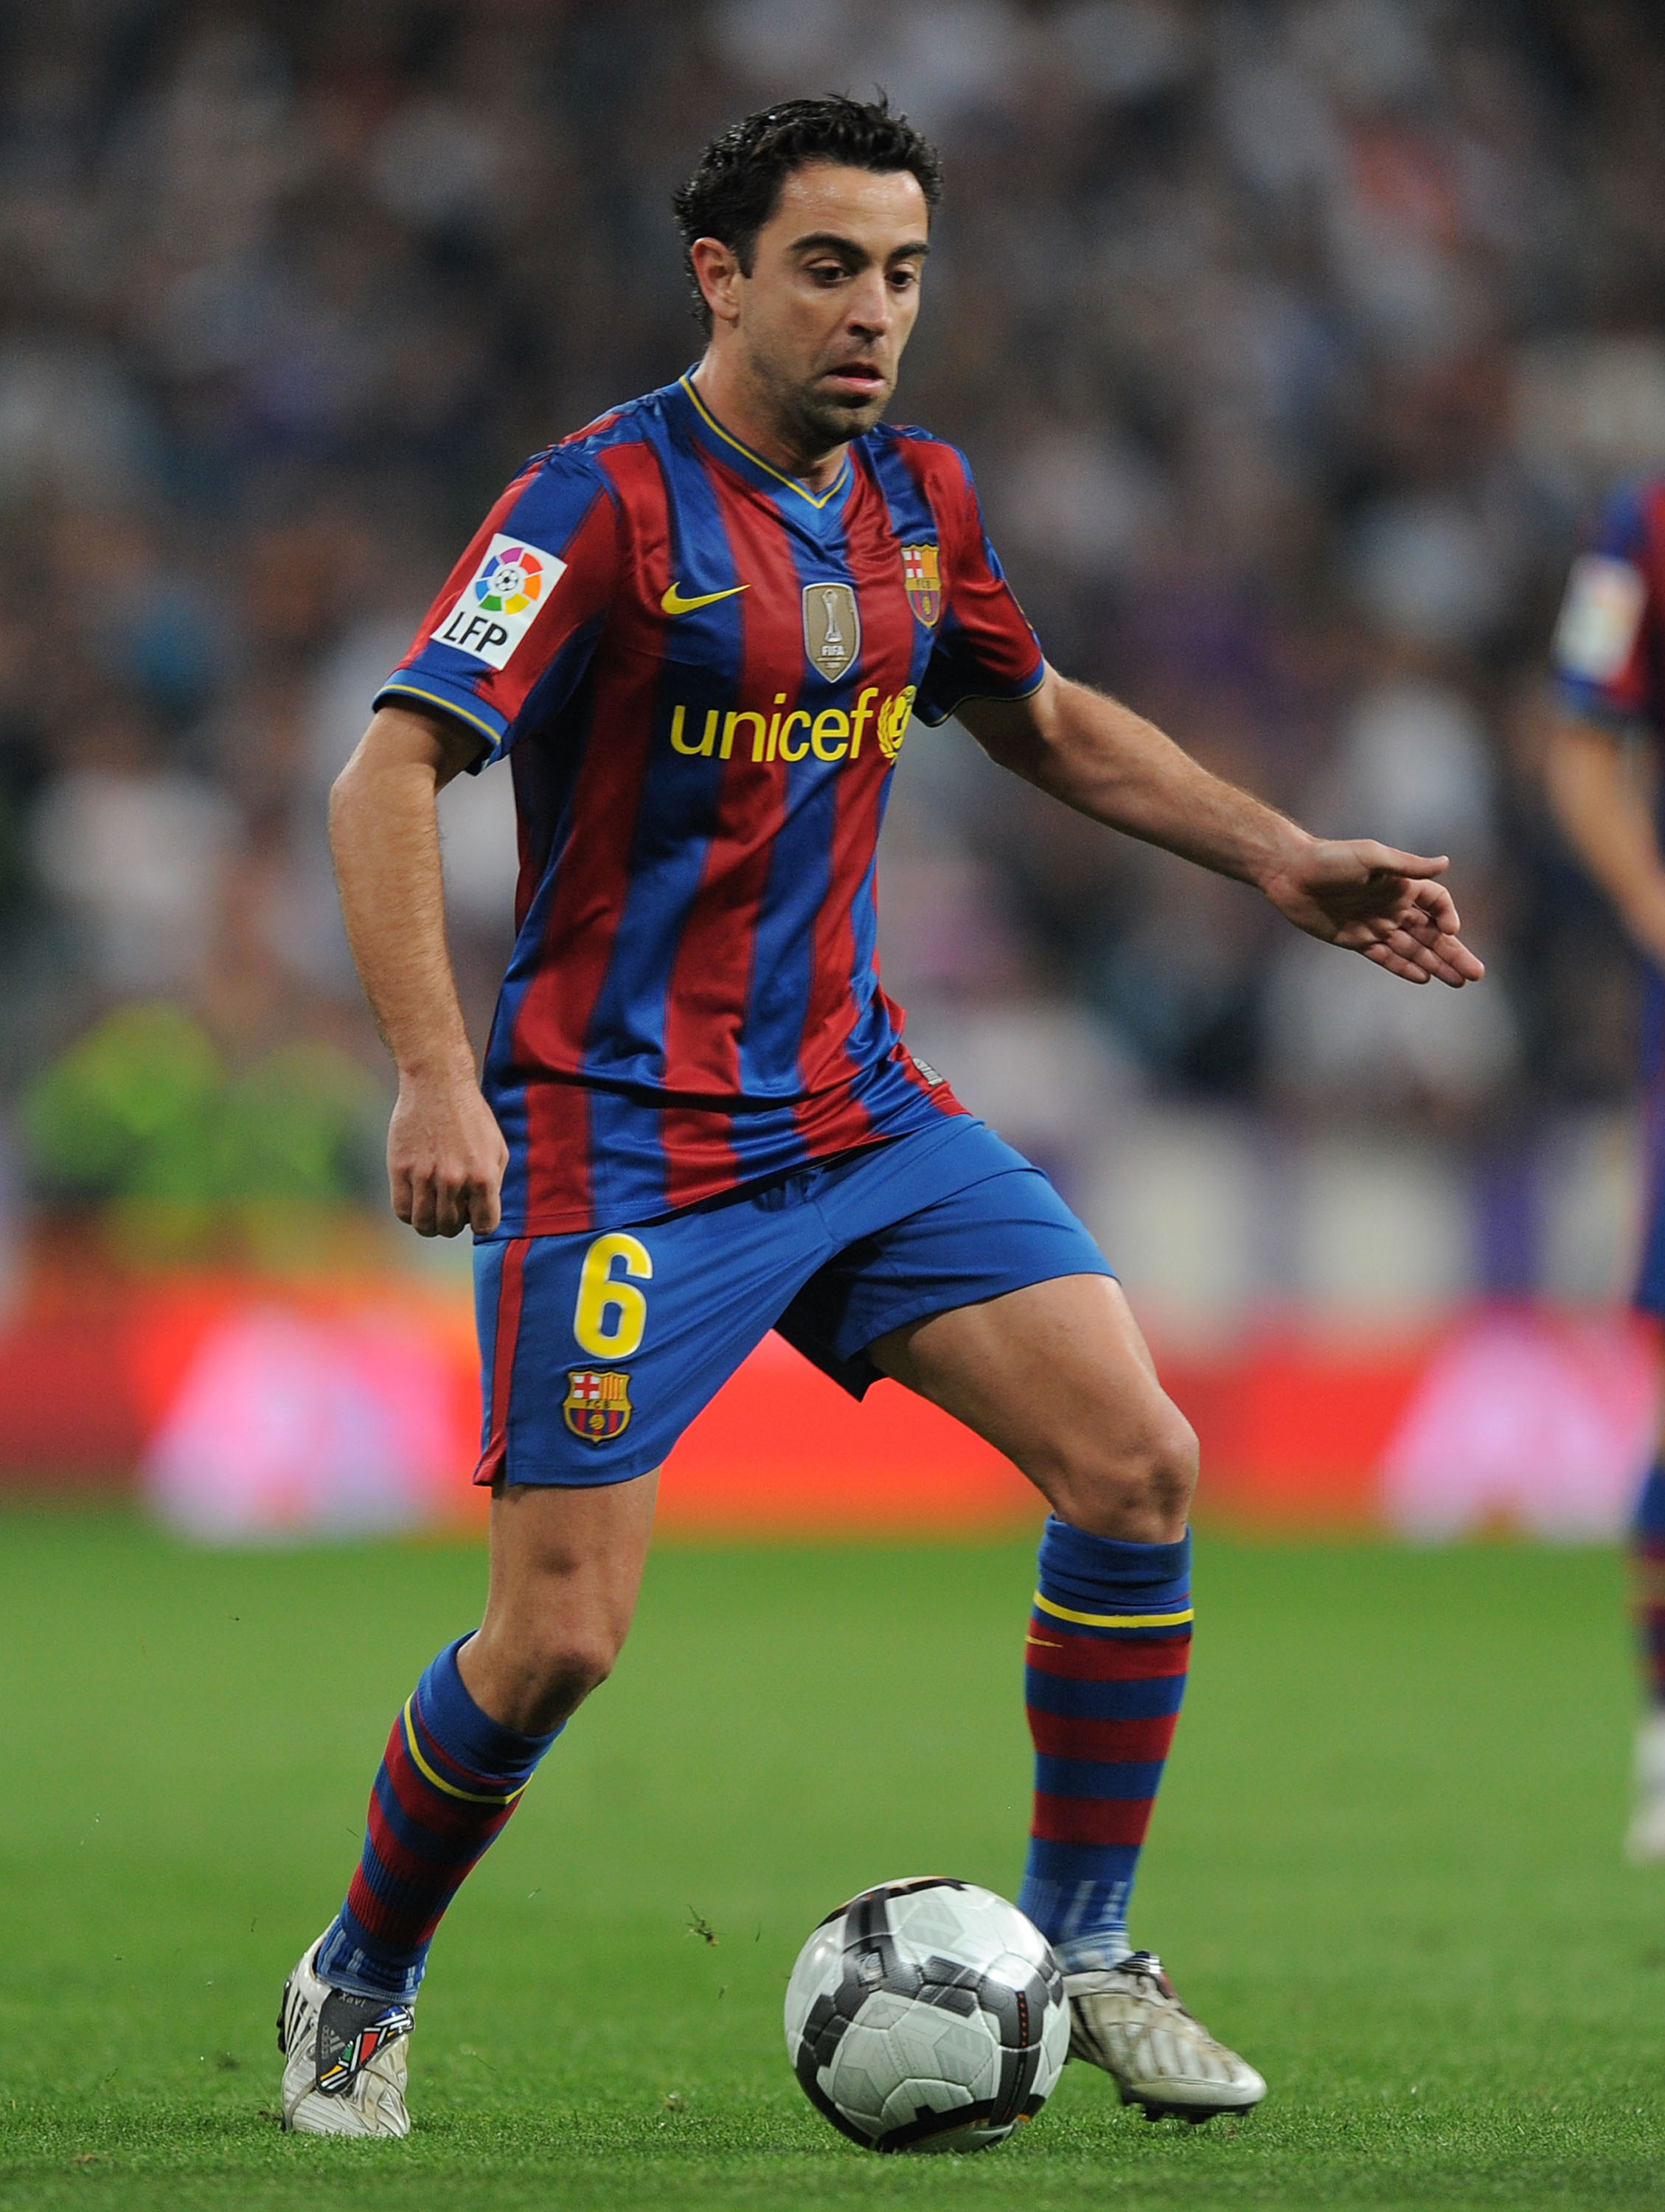 MADRID, SPAIN - APRIL 10:  Xavi Hernandez of Barcelona in action during the La Liga match between Real Madrid and Barcelona at the Estadio Santiago Bernabeu on April 10, 2010 in Madrid, Spain.  (Photo by Denis Doyle/Getty Images)